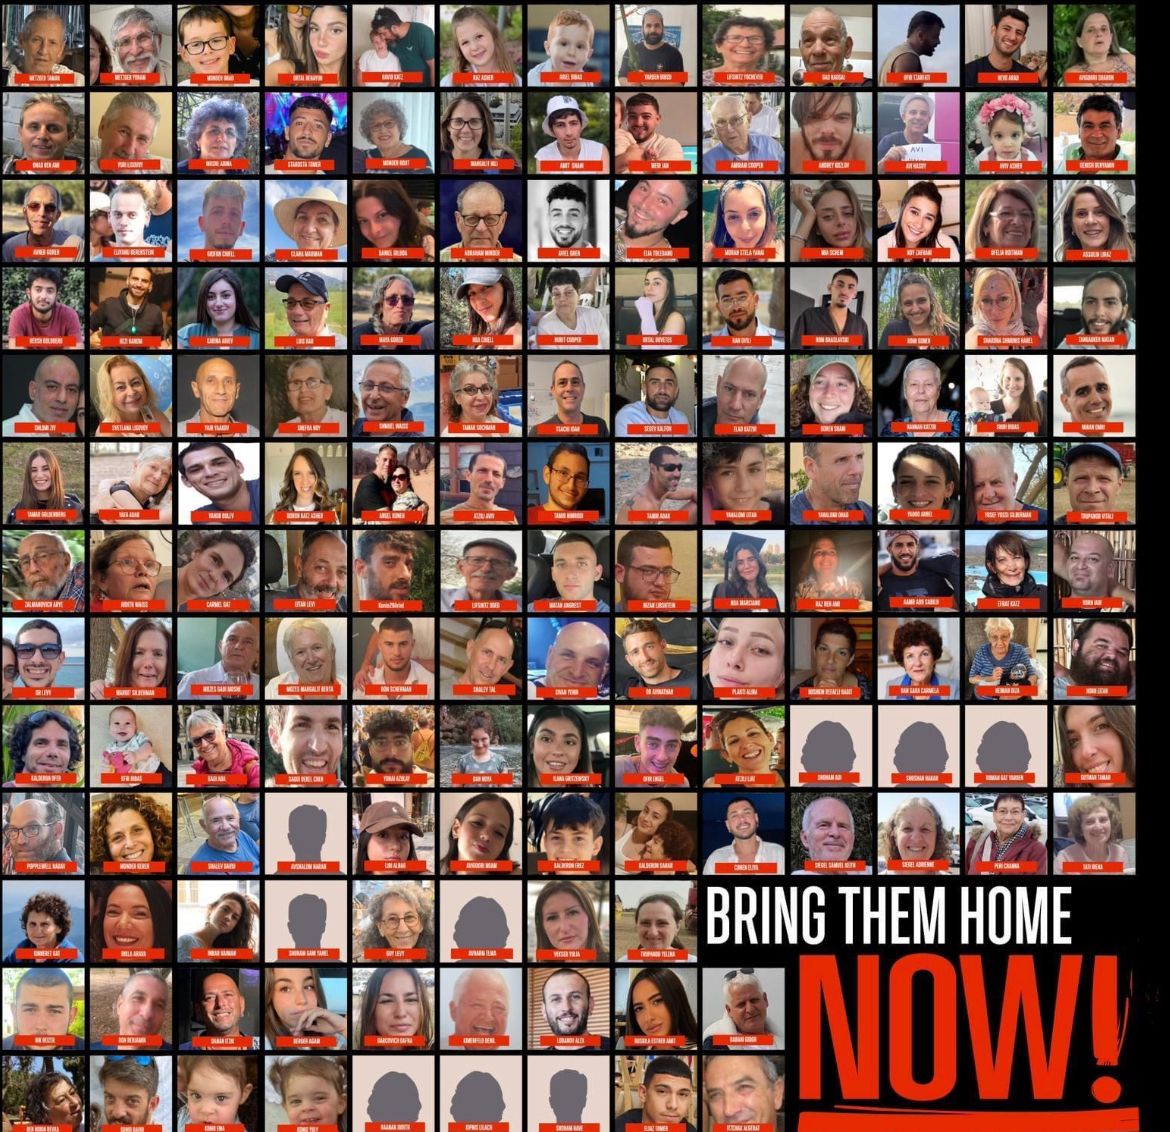 Bring them home NOW